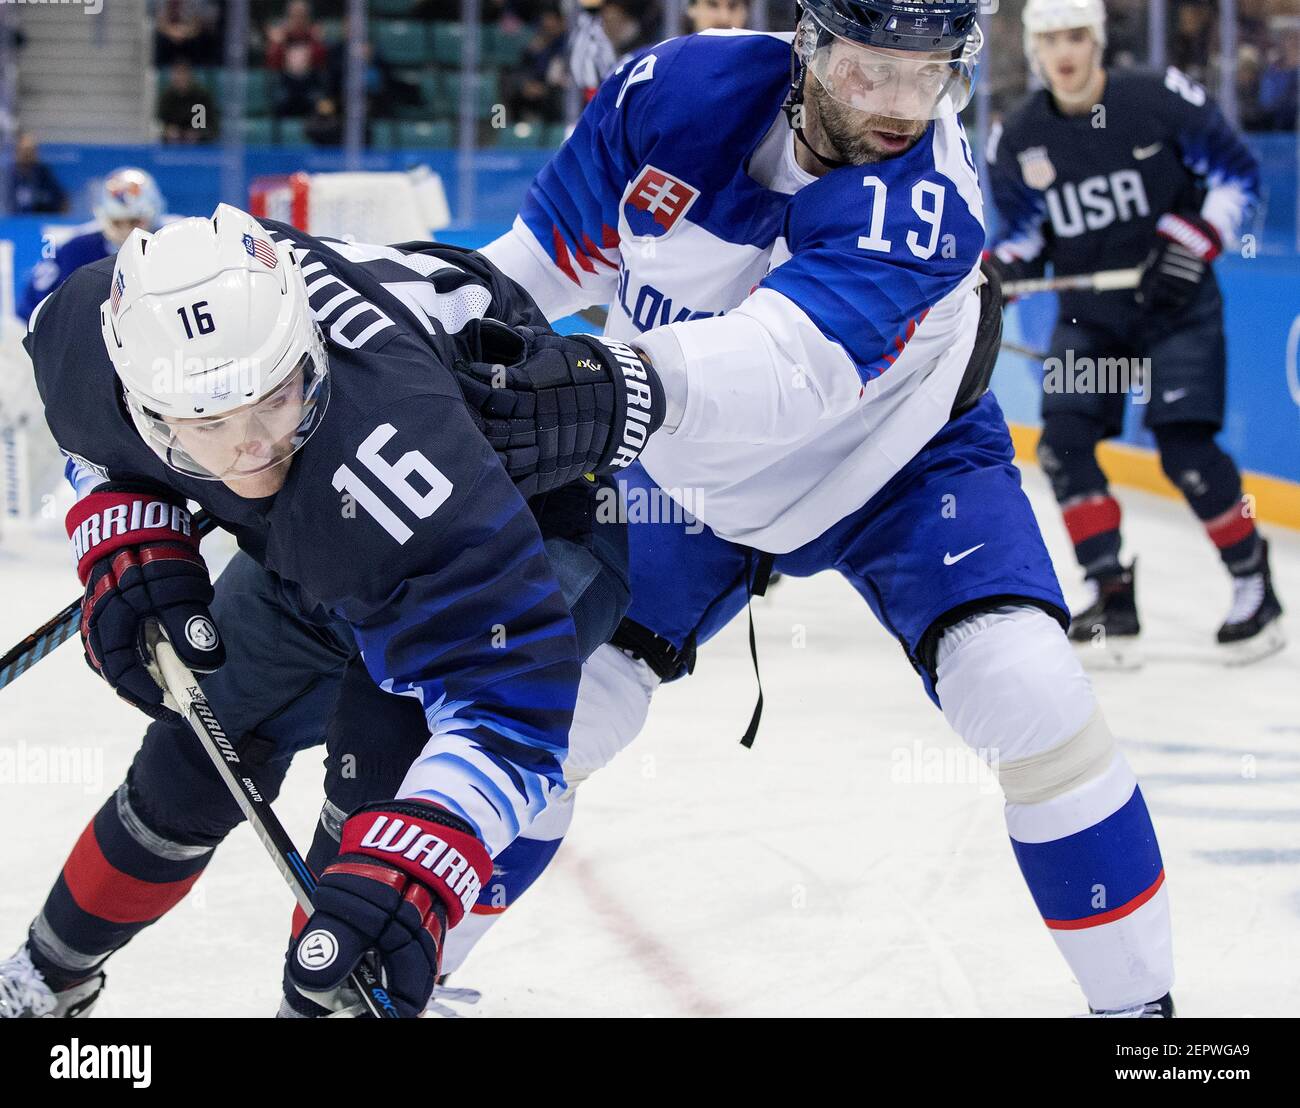 The United States' Ryan Donato (16) and Slovakia's Tomas Starosta (19) battle for the puck in the first period during group play on Friday, Feb. 16, 2018, at South Korea's Gangneung Hockey Centre in the Pyeongchang Winter Olympics. (Photo by Carlos Gonzalez/Minneapolis Star Tribune/TNS/Sipa USA) Stock Photo